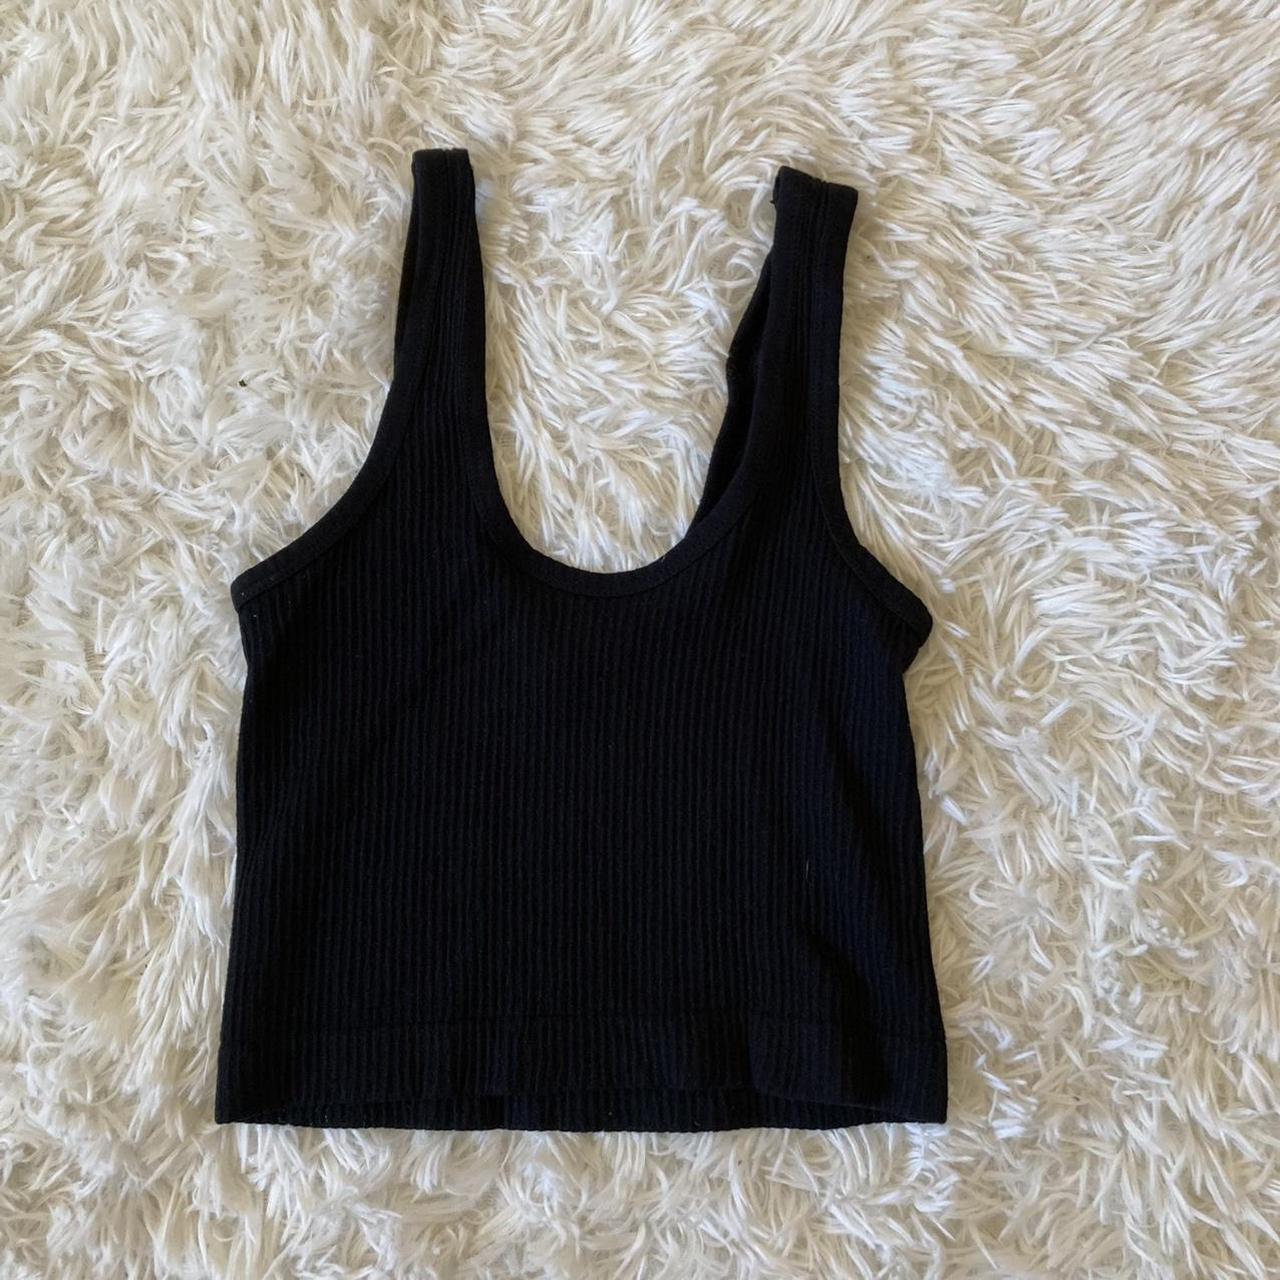 Urban outfitters tank top! Super comfortable and... - Depop